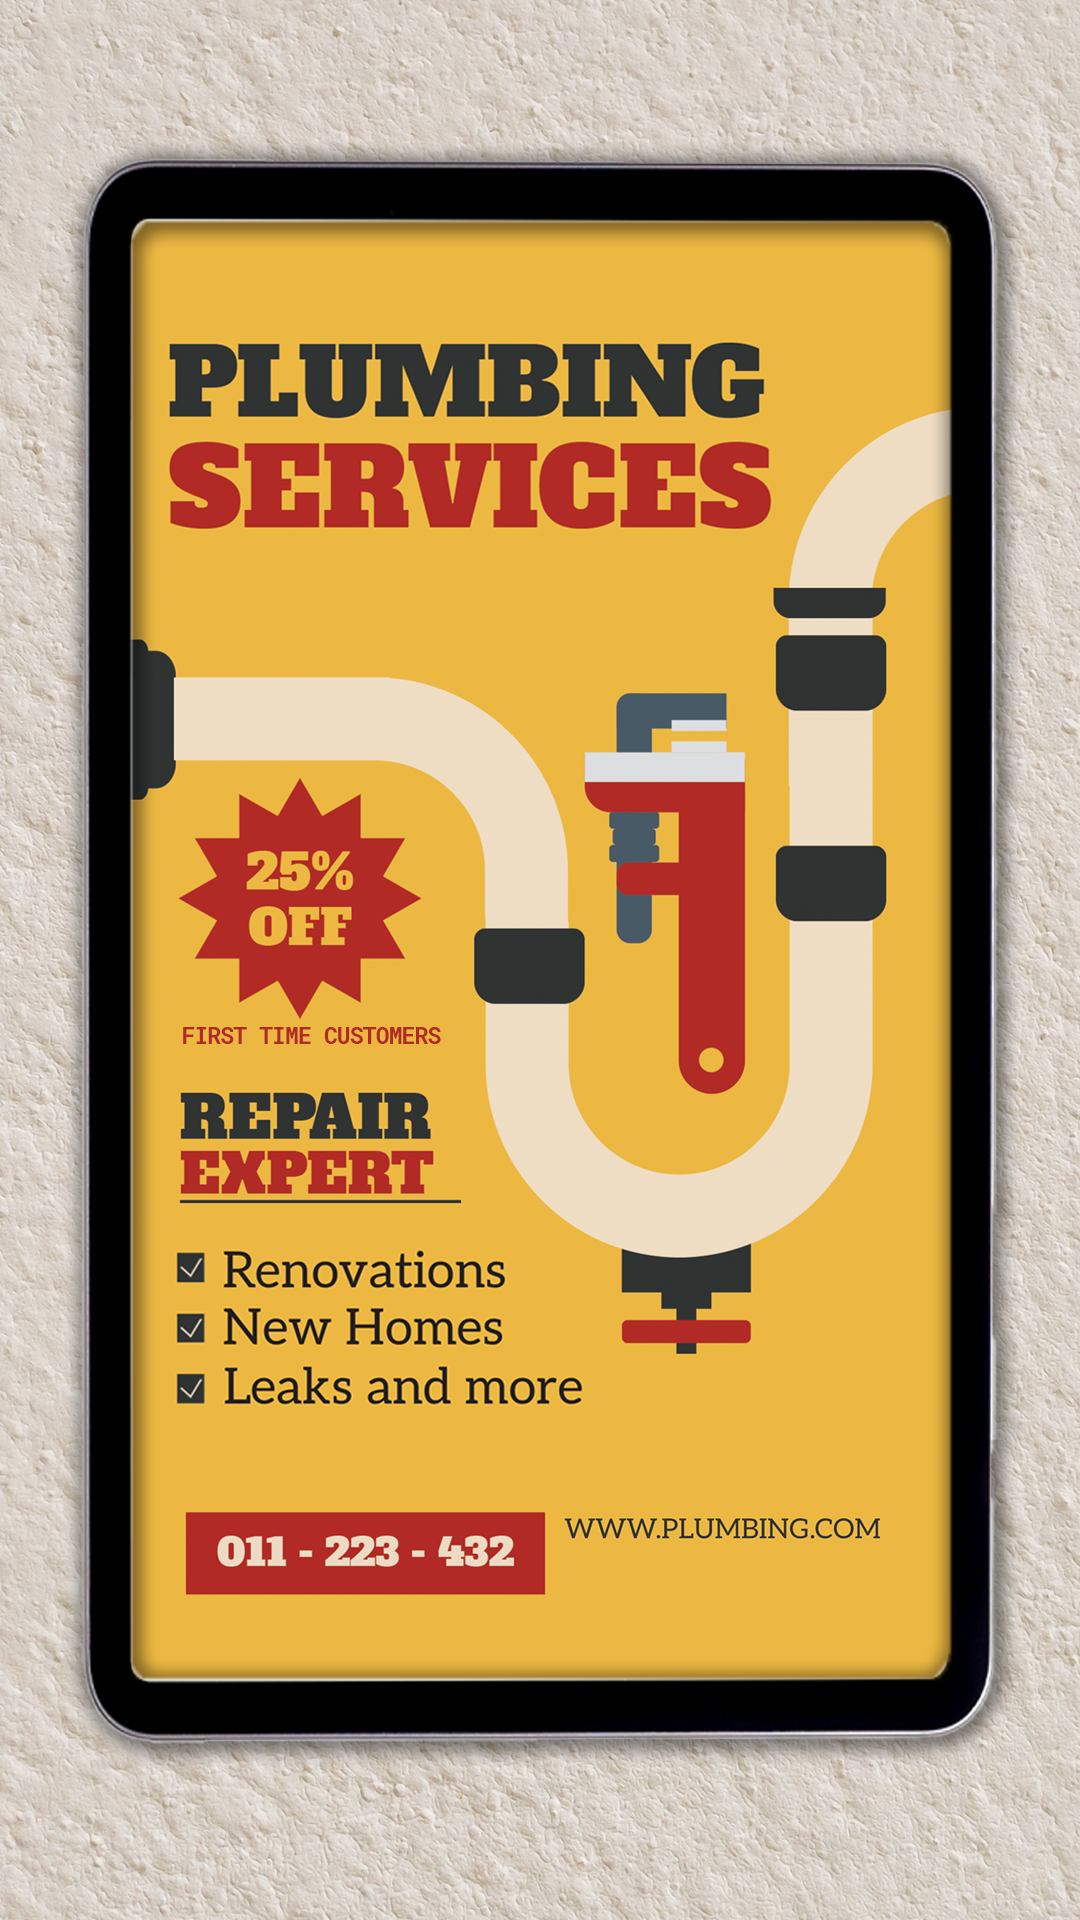 An advertisement for plumbing services with a 25% off offer